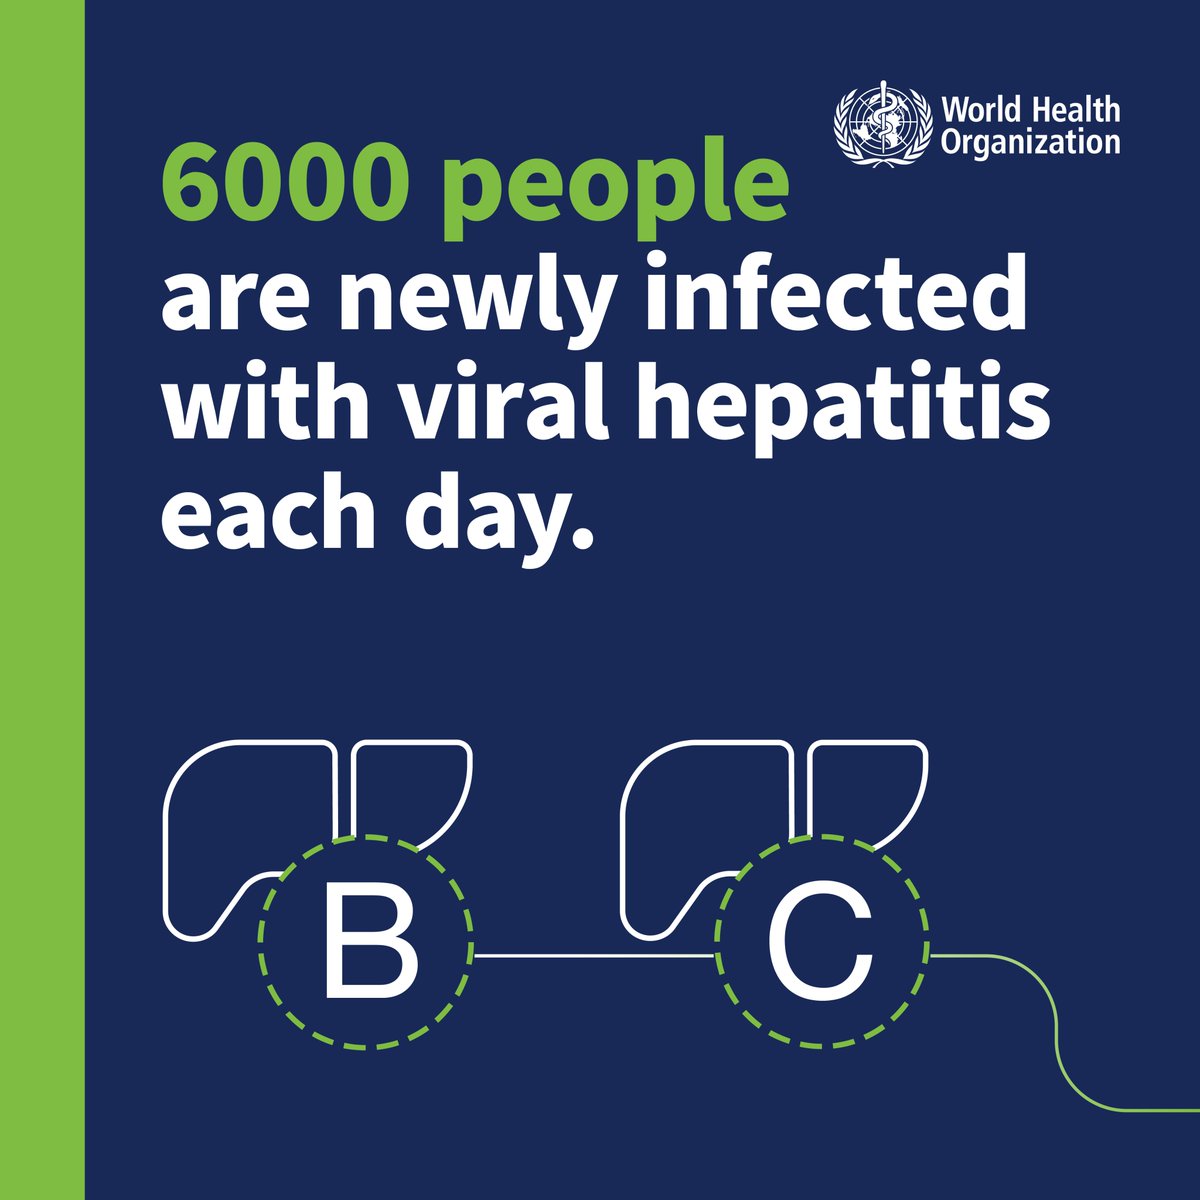 Every day, more than 6,000 people are being infected with viral hepatitis, warns @WHO. The disease is the second leading infectious cause of death globally – with 1.3 million deaths per year. Latest data: bit.ly/43Pzpeq